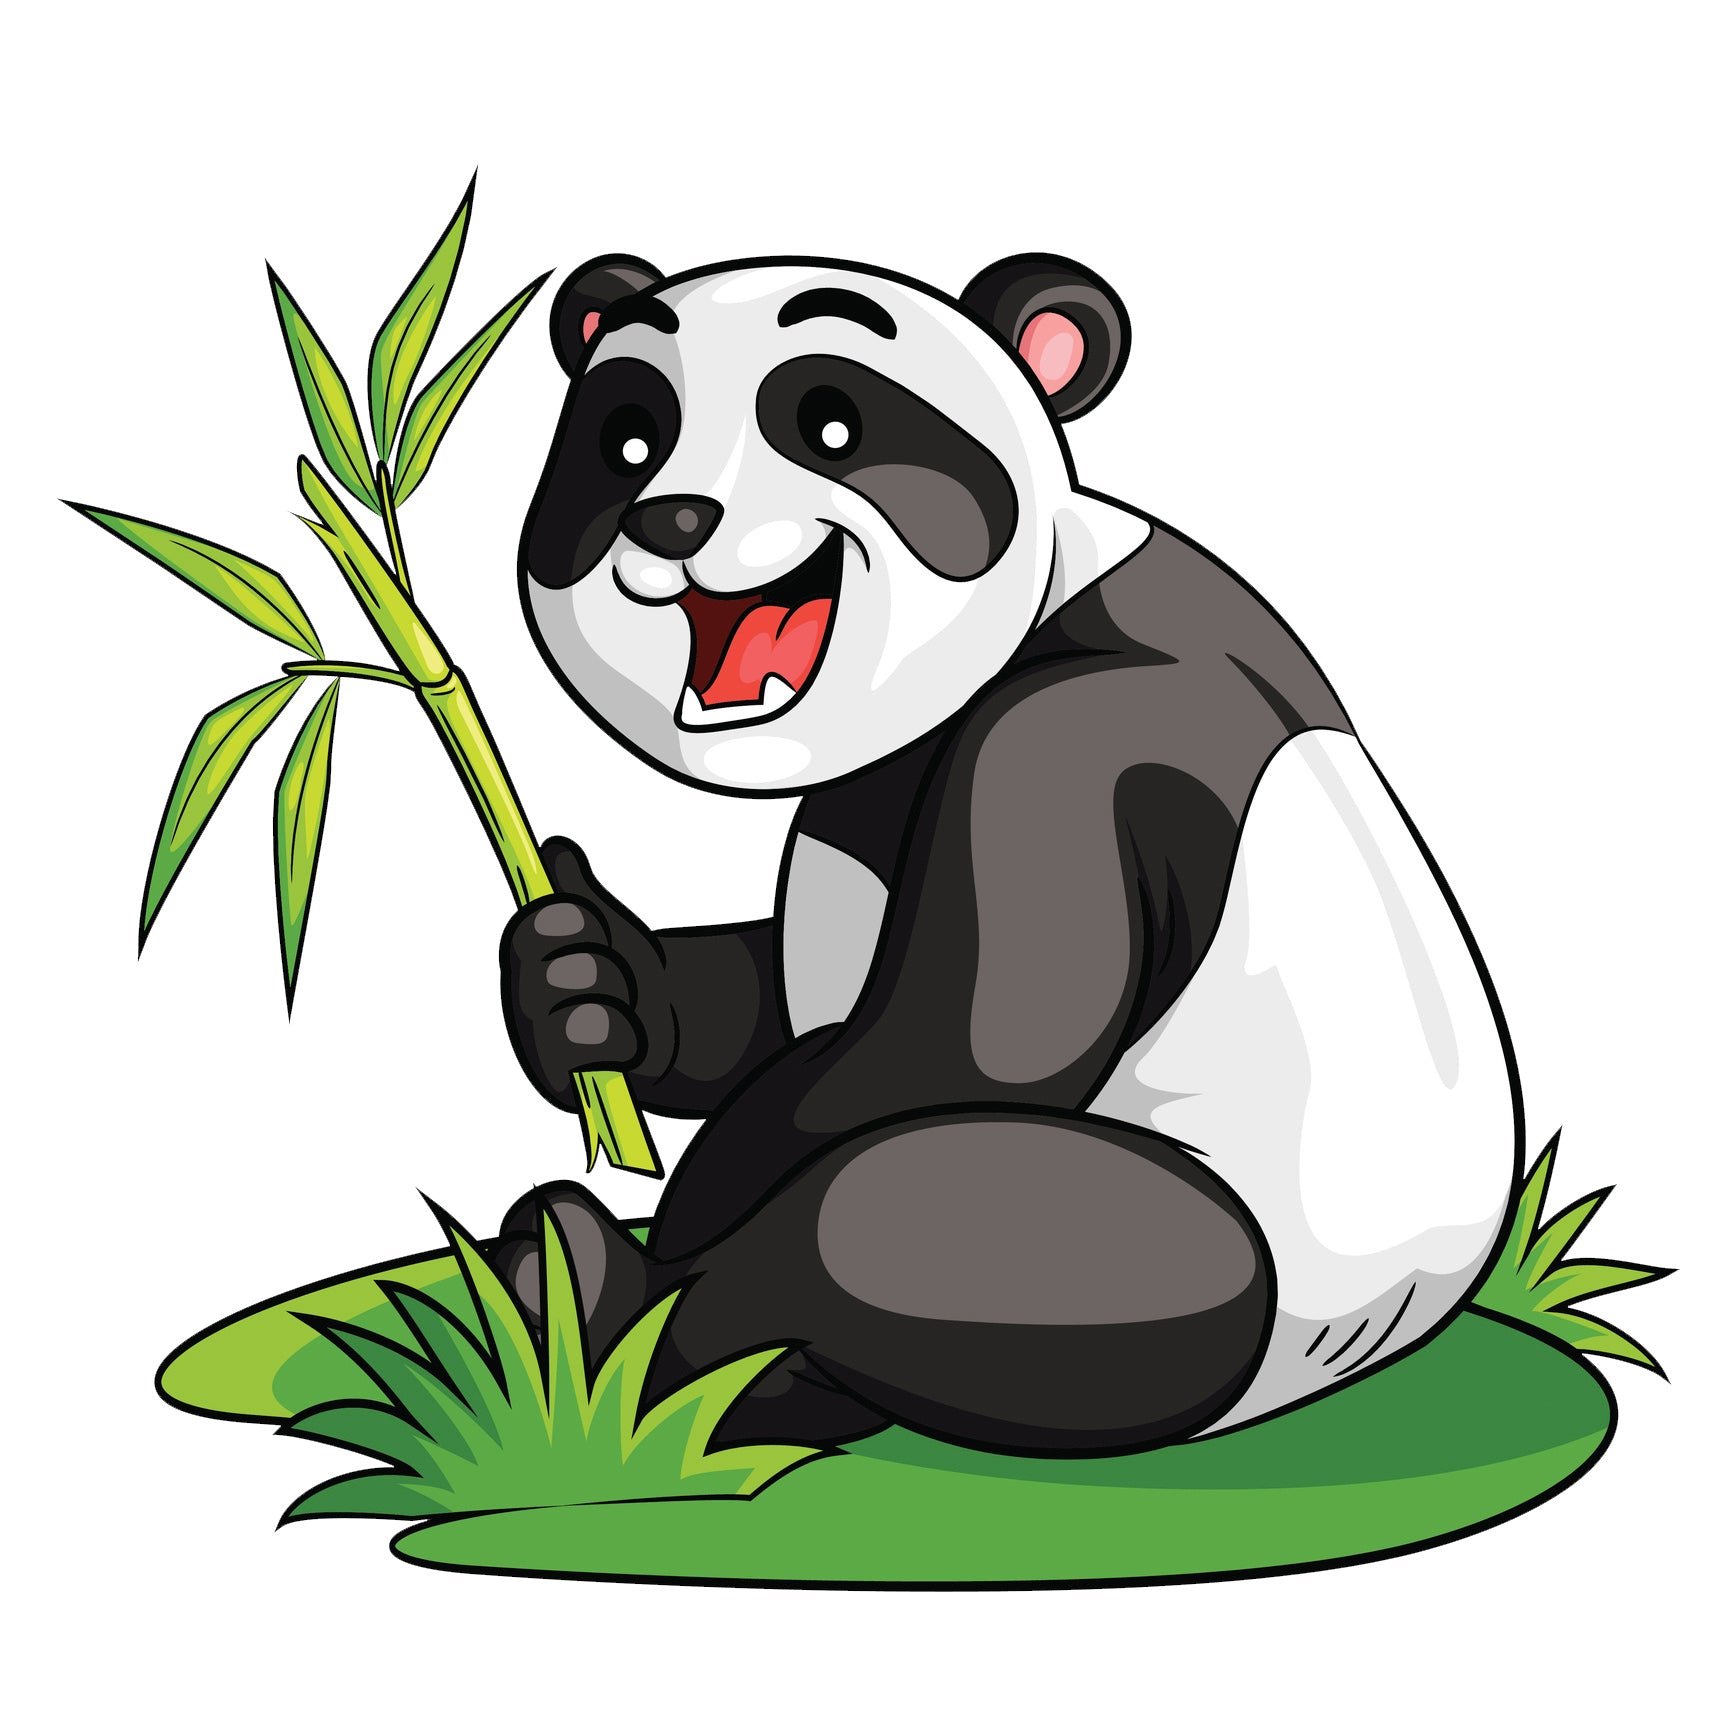 Silly Happy Panda Bear with Bamboo Vinyl Decal Sticker